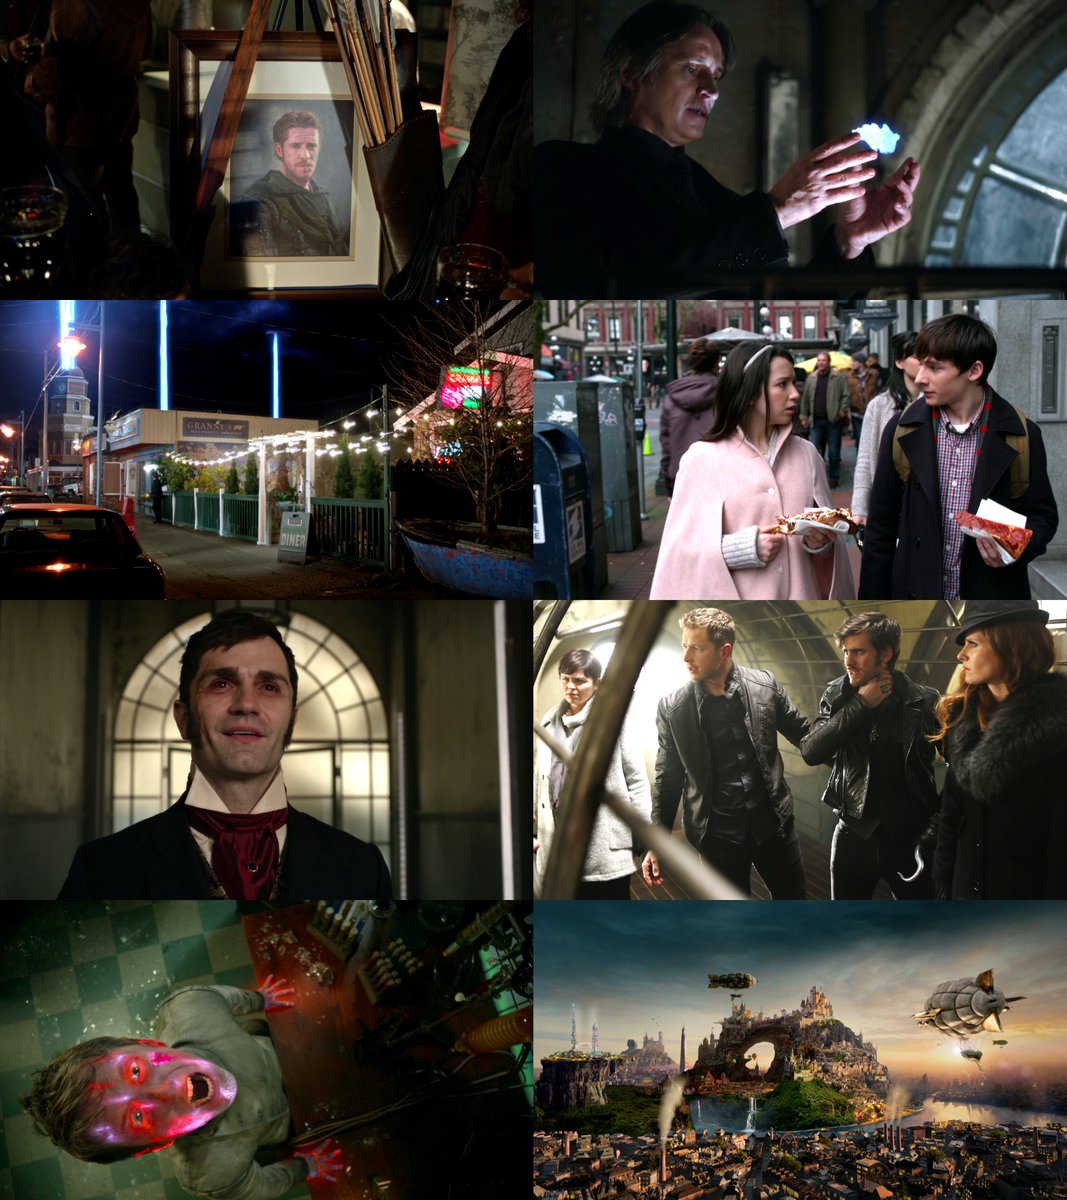 Today marks the 8th anniversary of the #OnceUponATime episode 'Only You', written by David H Goodman & Andrew Chambliss, and directed by Romeo Tirone. Henry and Violet leave Storybrooke to destroy magic. Meanwhile, Snow, David, Hook & Zelena find themselves in a strange new land.